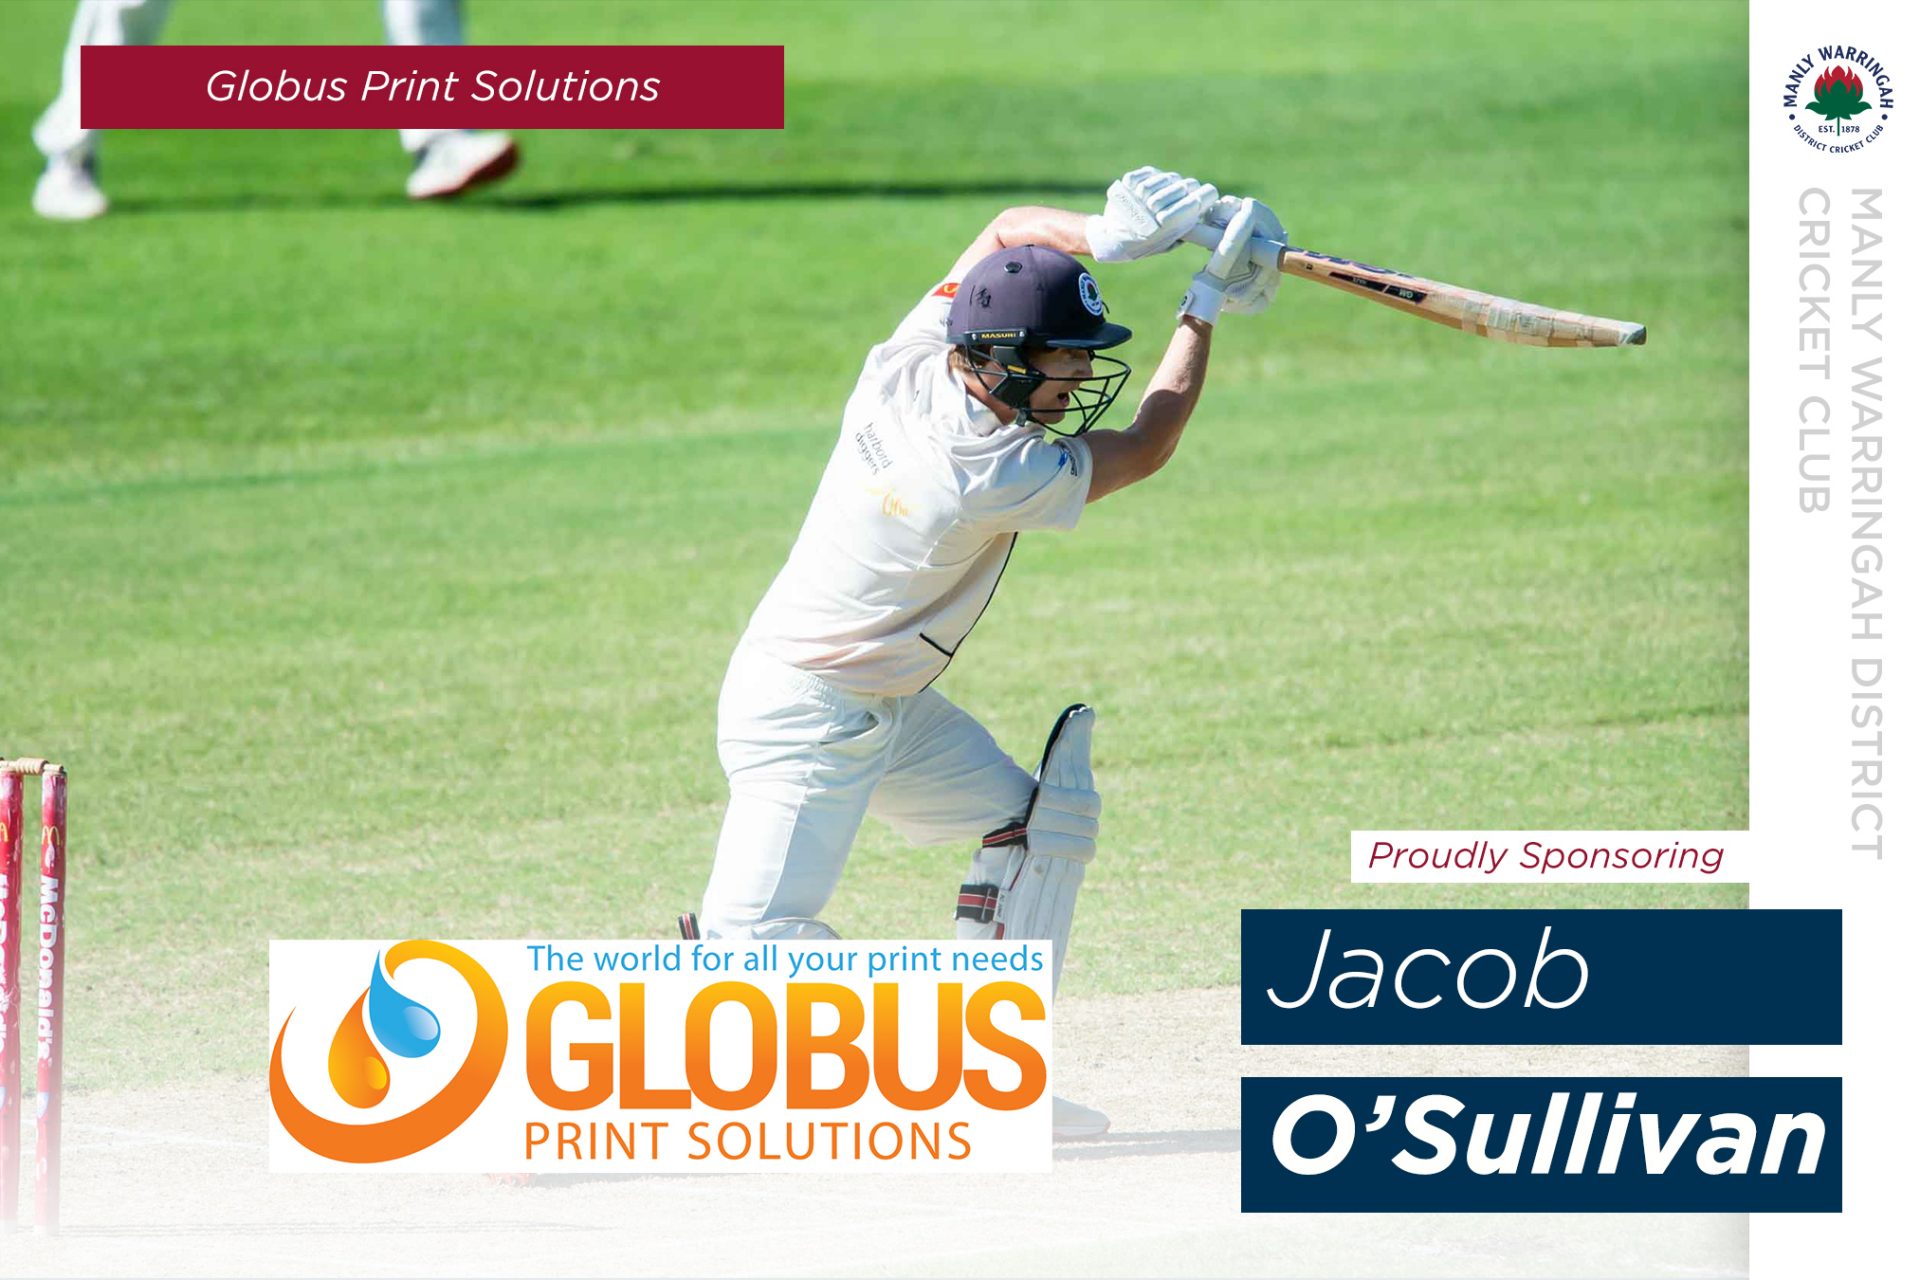 Globus Print Solutions partner with Jacob O'Sullivan in 2023/24